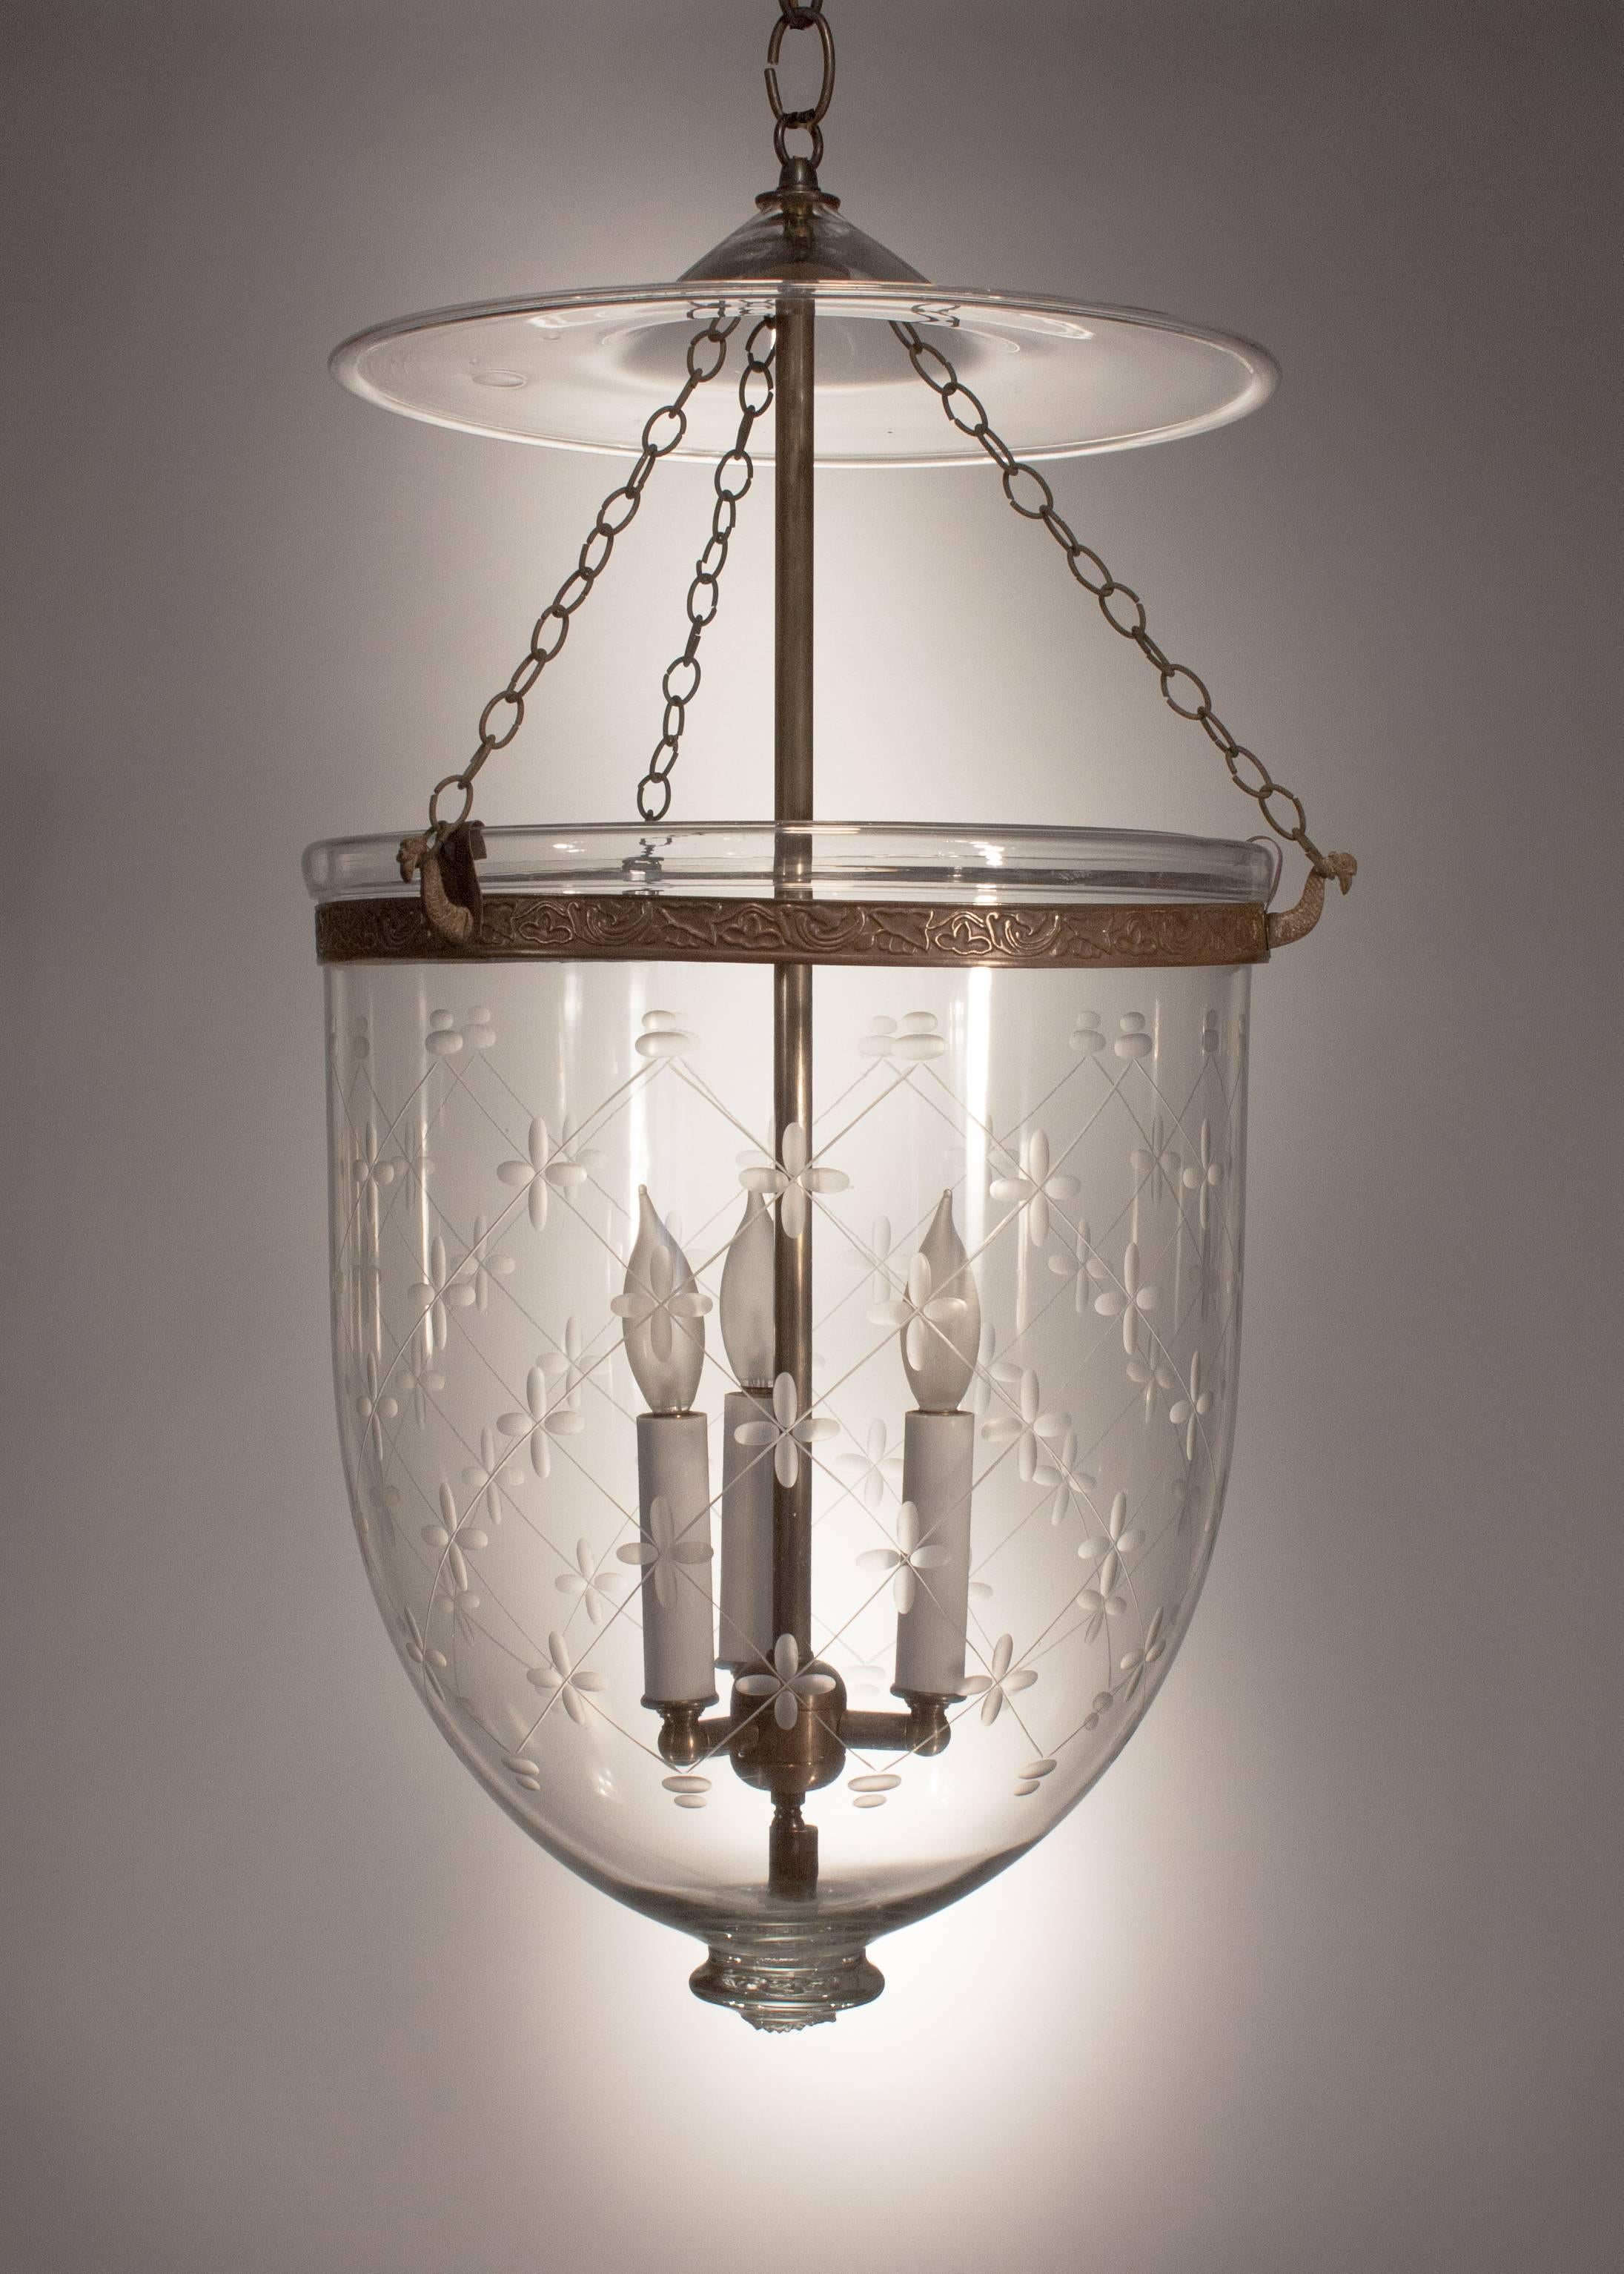 This exquisite English hall lantern features quintessential form and superb quality handblown glass, replete with desirable swirls and air bubbles. It has its original smoke bell and an embossed brass band with vine design. In addition, the finely